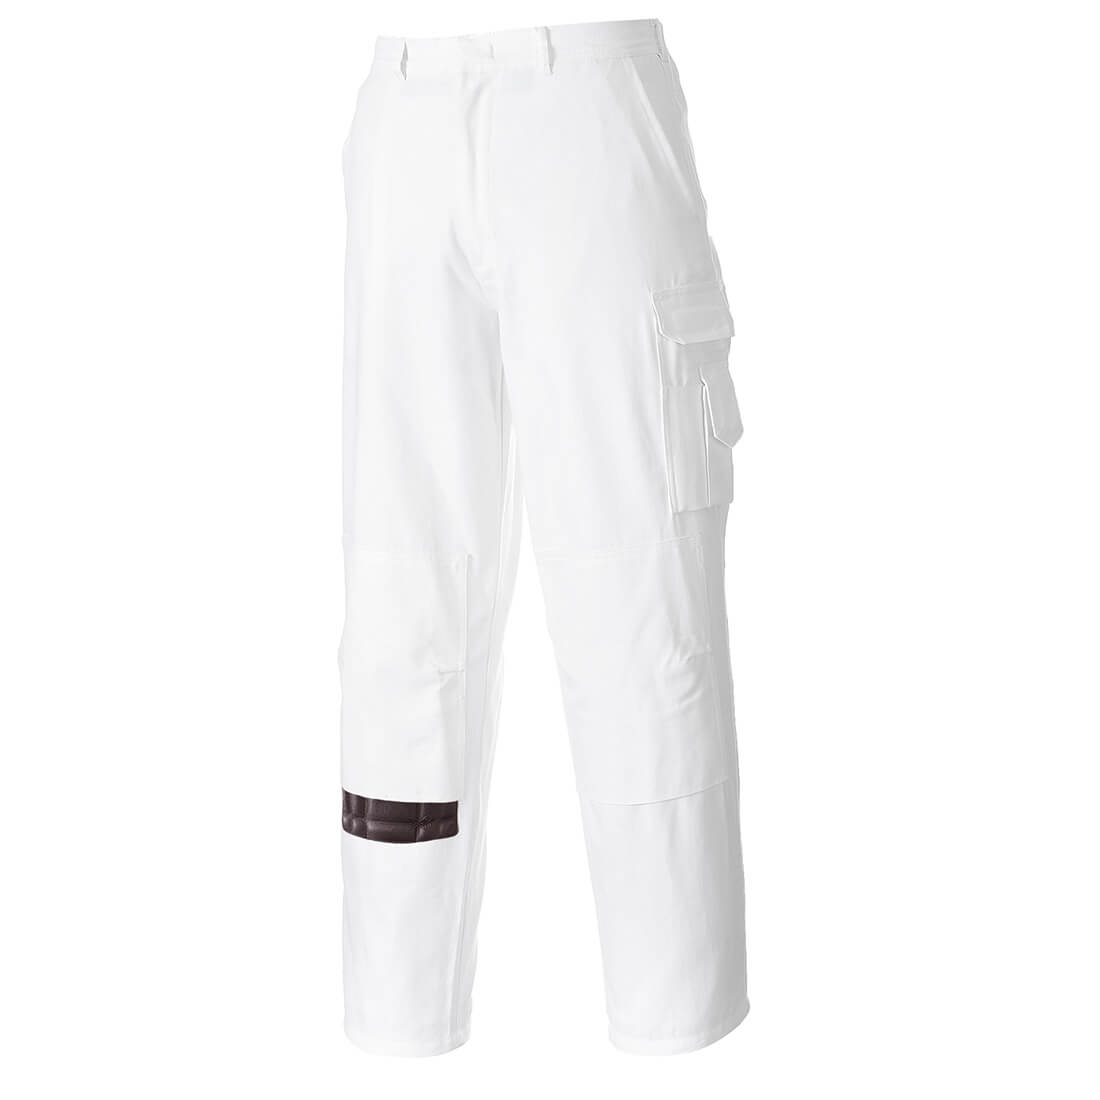 Image of Portwest Painters Trousers White XL 31"